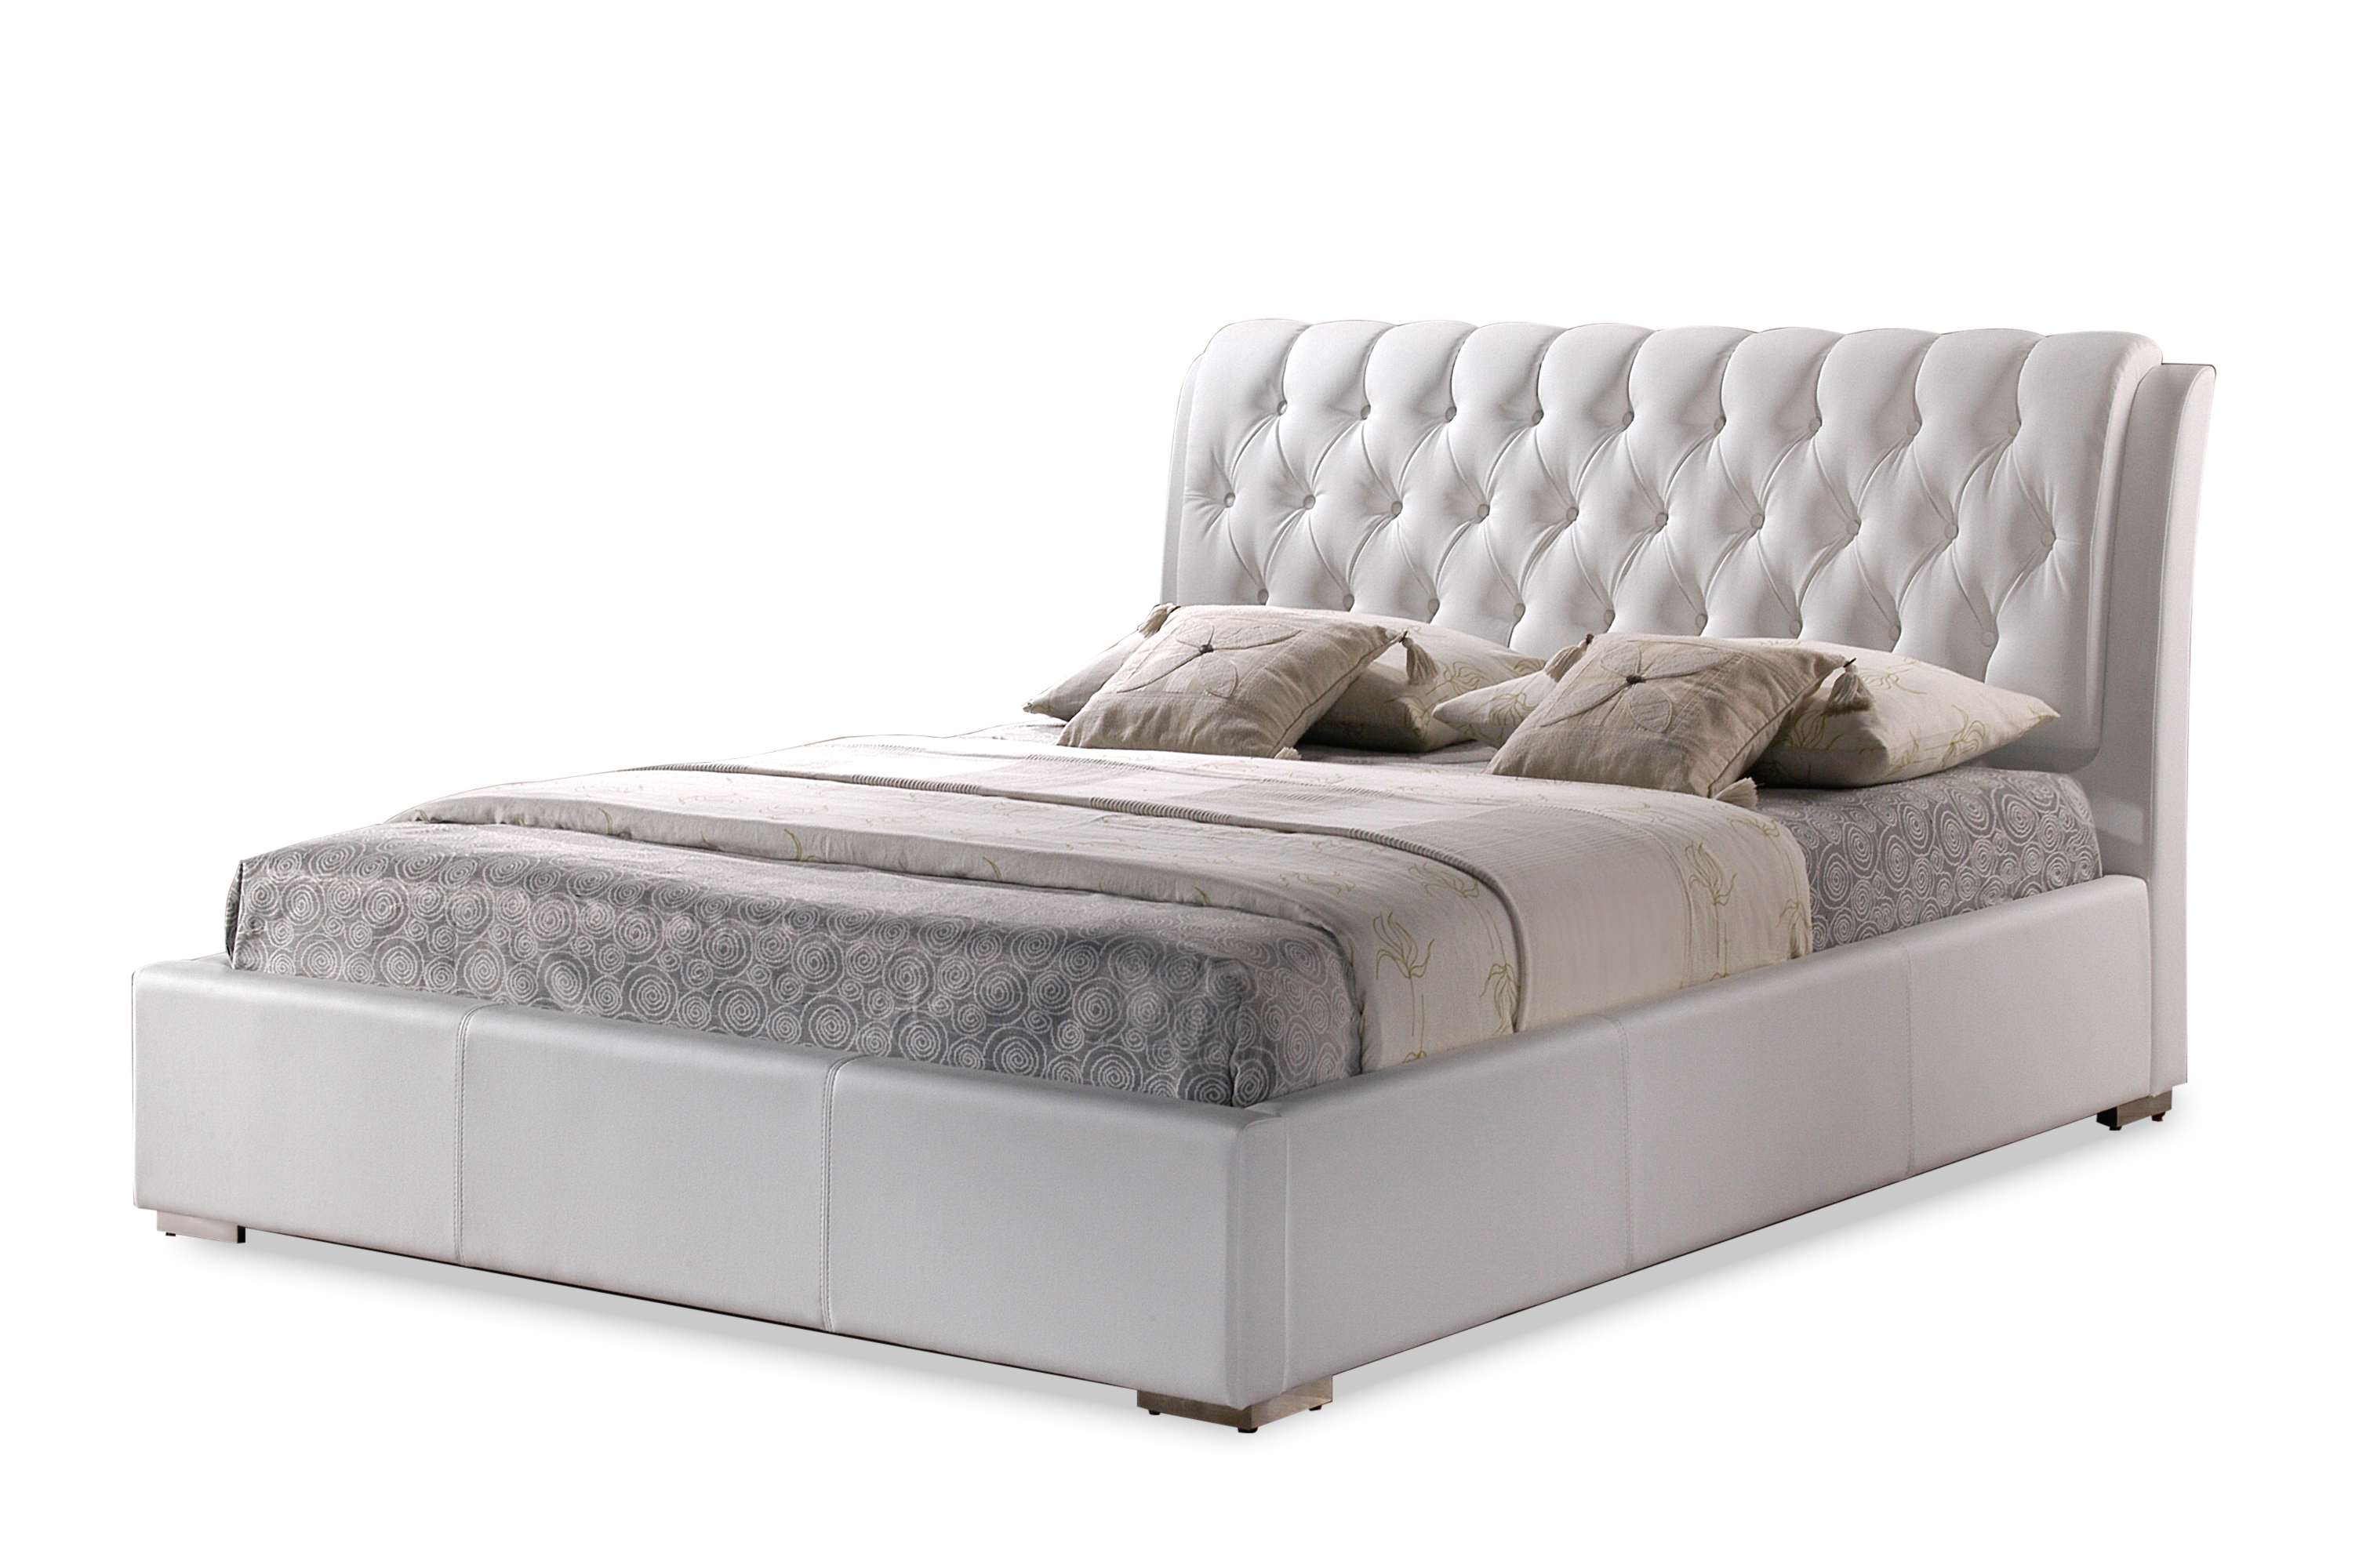 Bianca White Modern Bed With Tufted, Modern White Queen Headboard